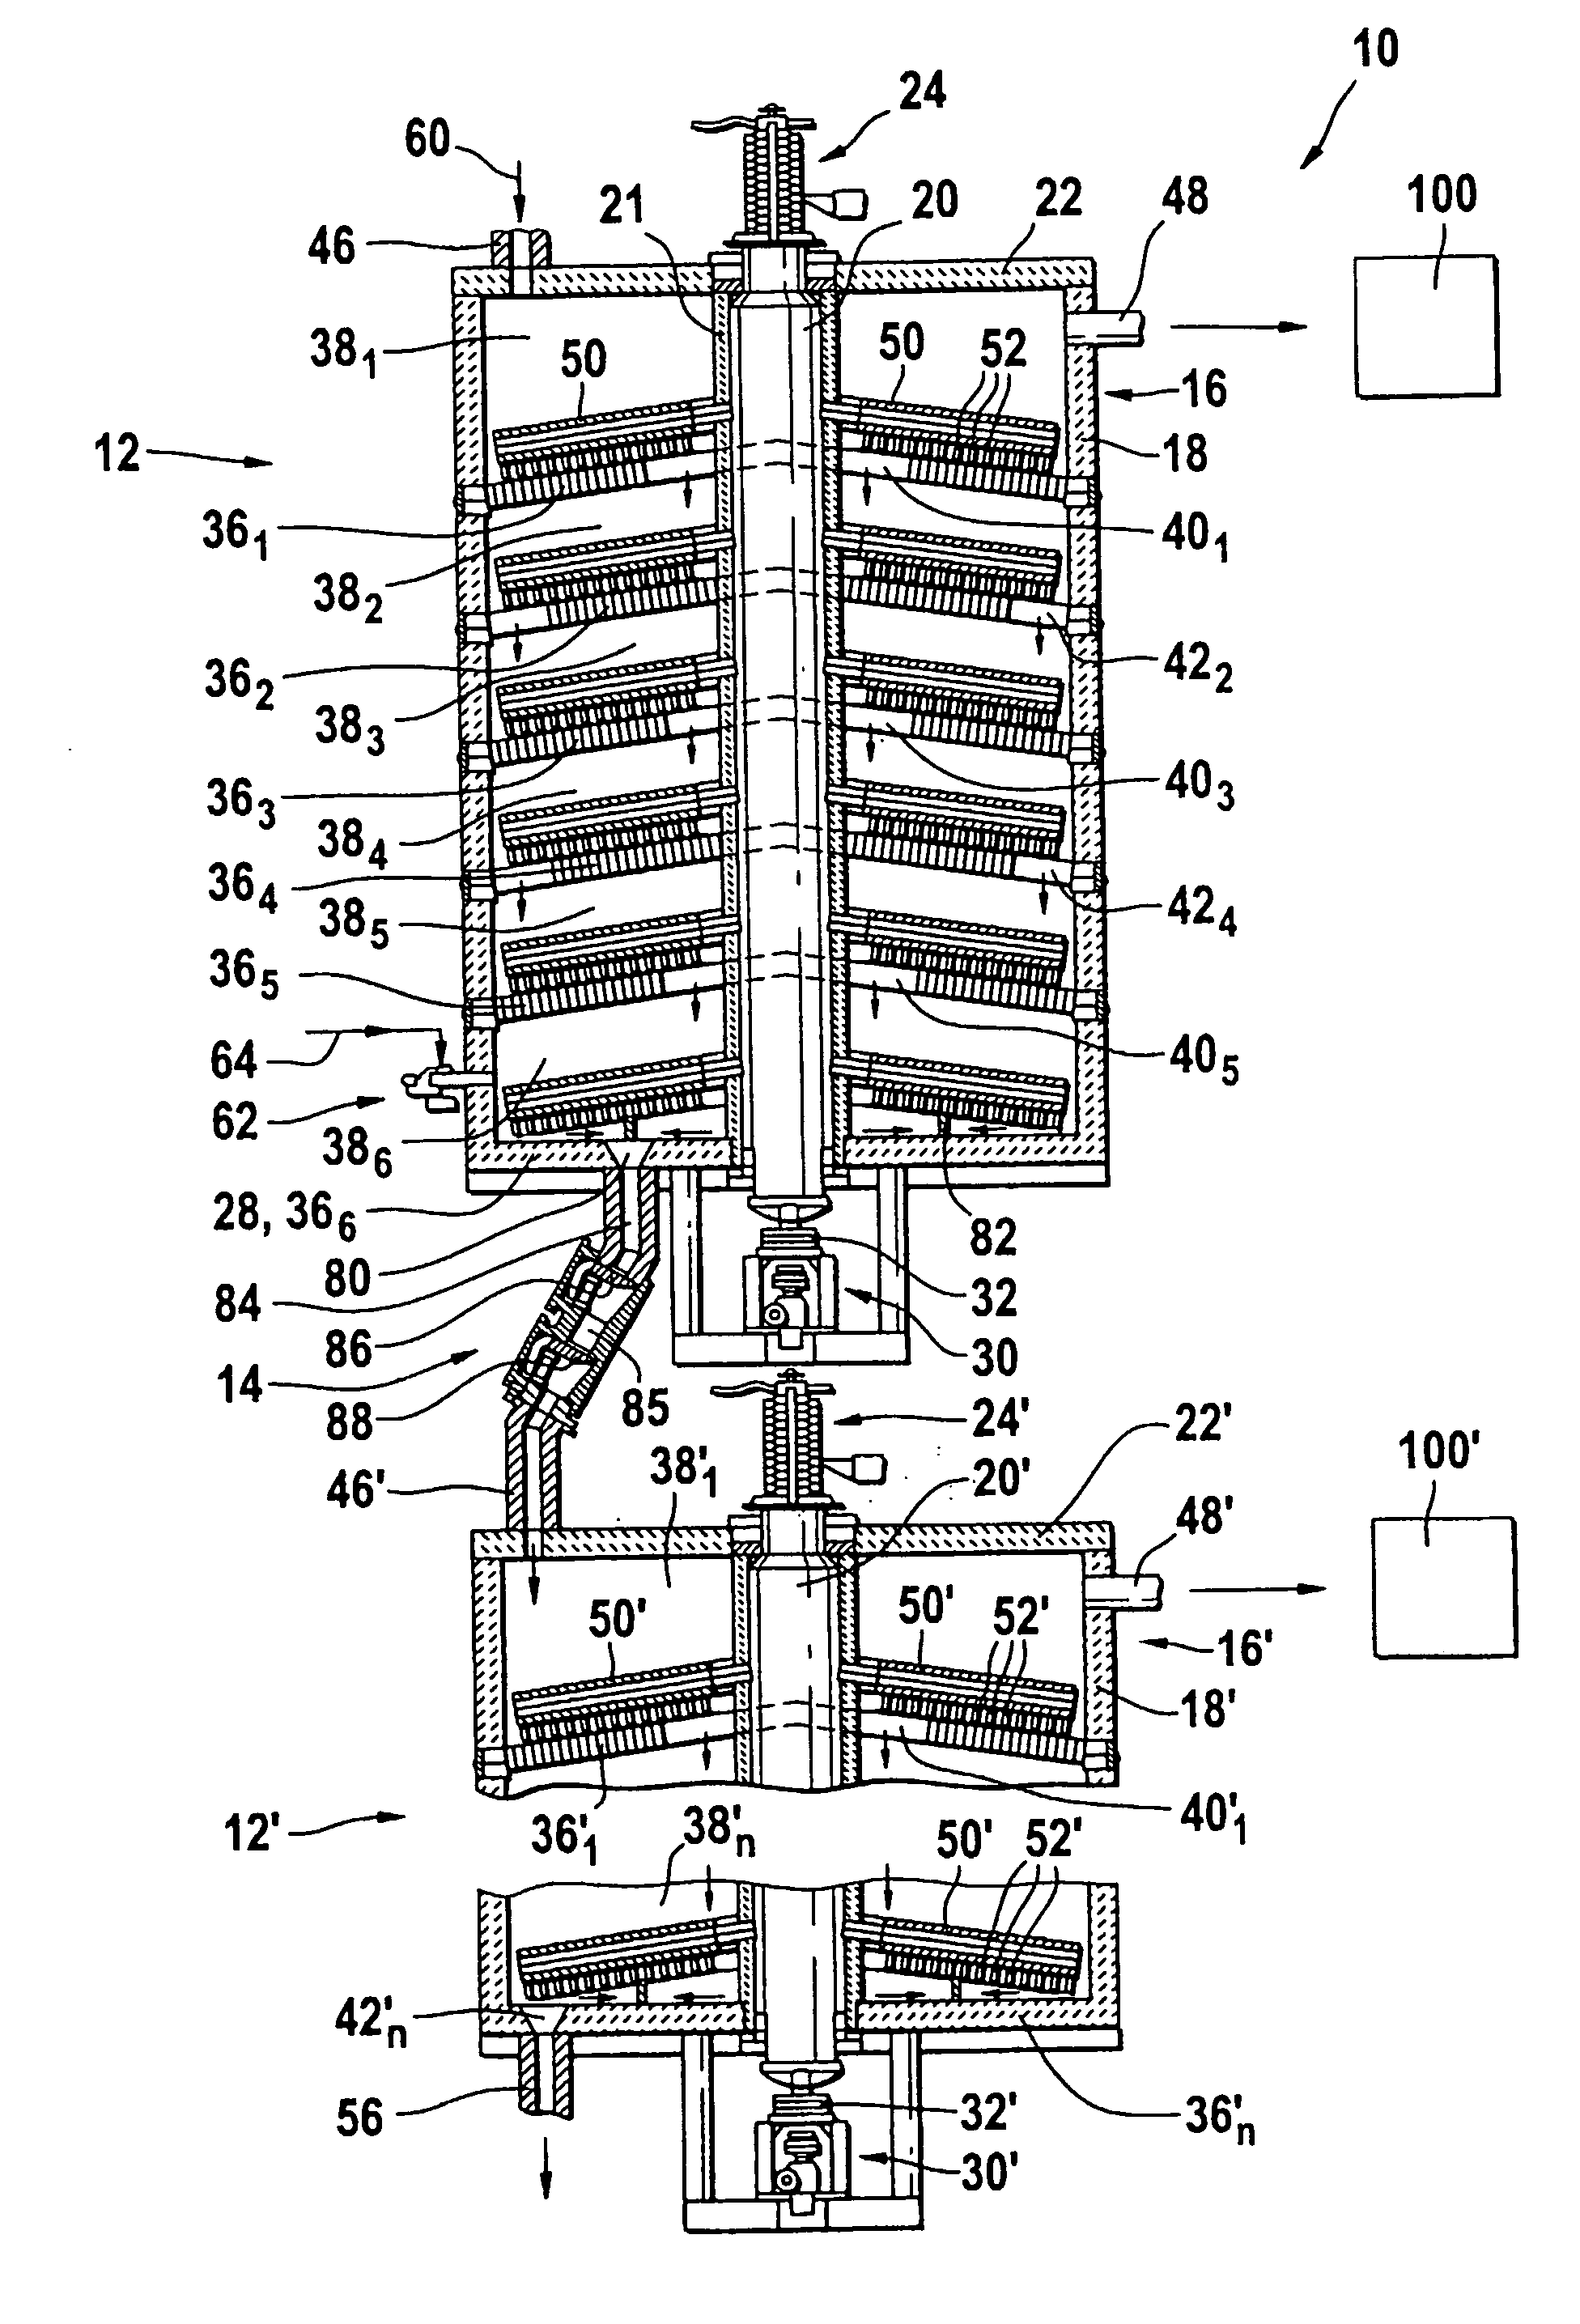 Method of operating a multiple hearth furnace